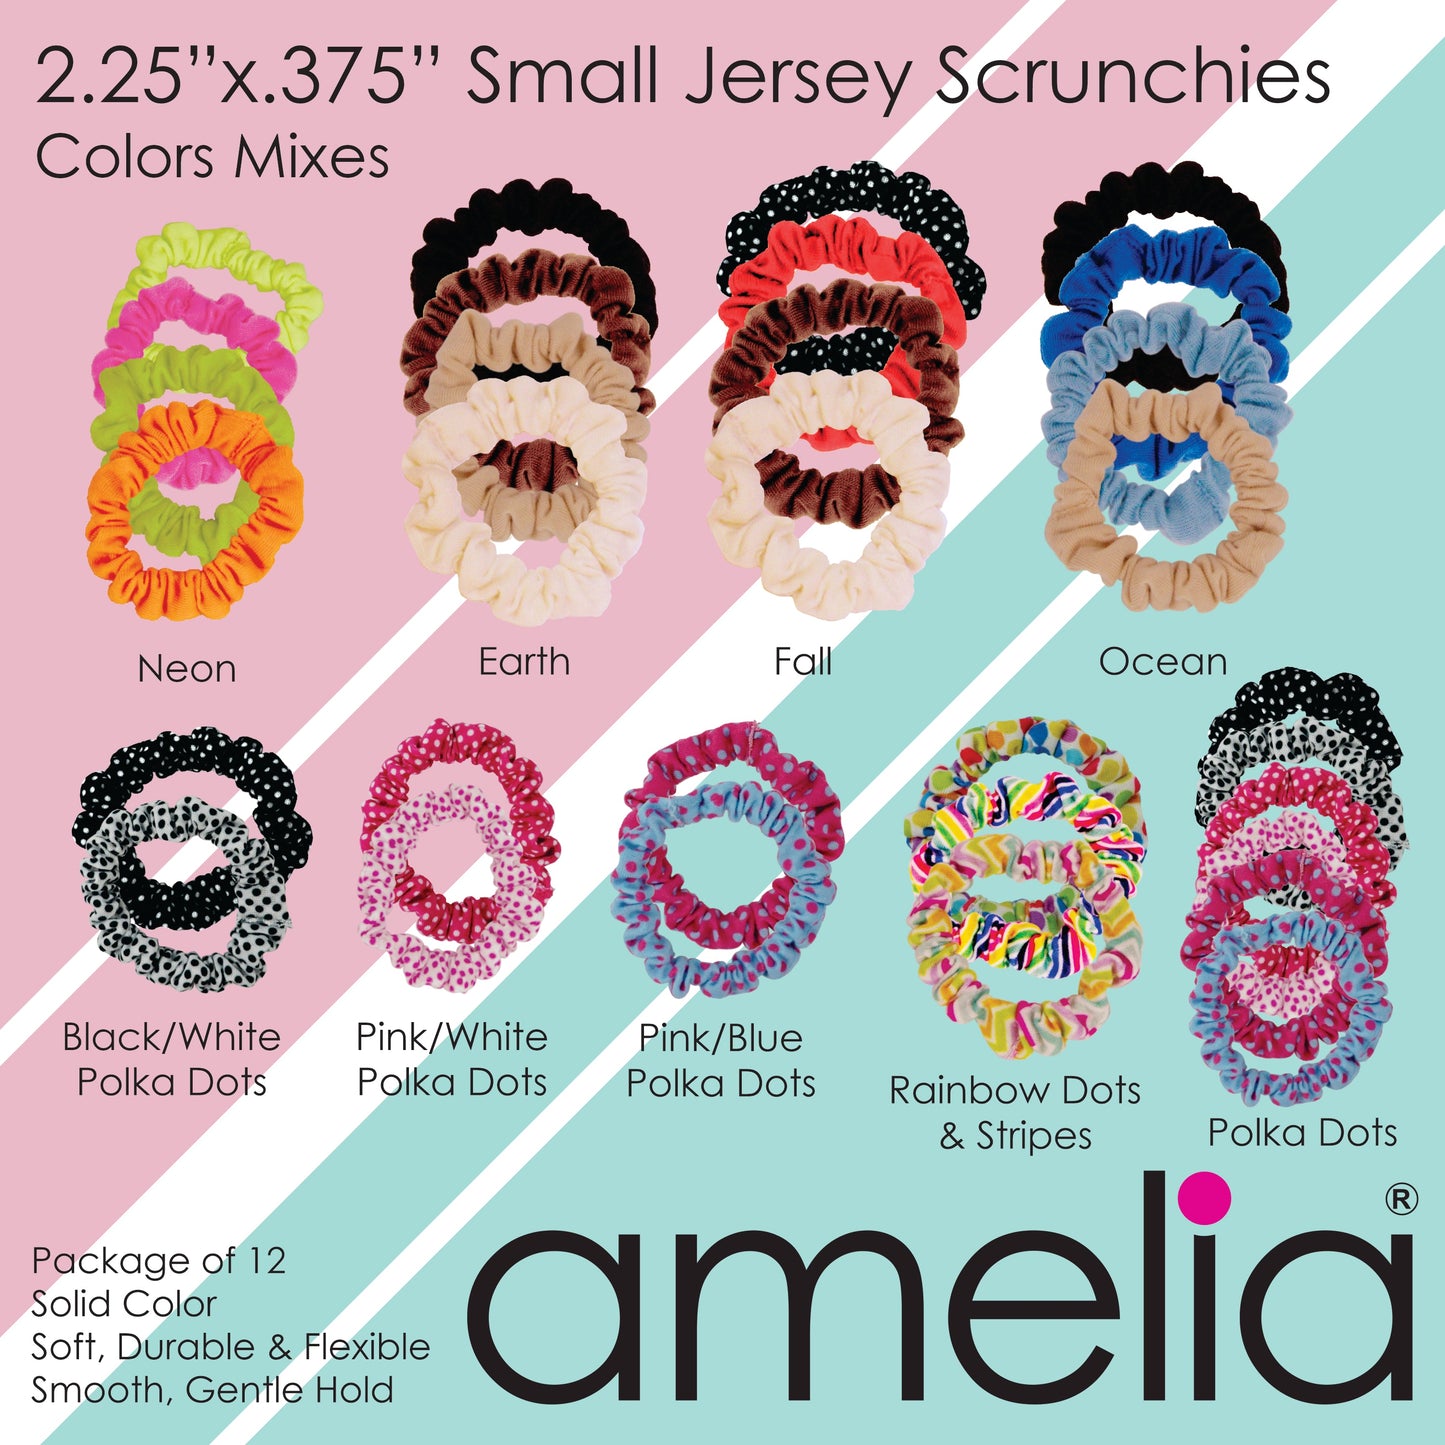 Amelia Beauty, Brown Jersey Scrunchies, 2.25in Diameter, Gentle on Hair, Strong Hold, No Snag, No Dents or Creases. 12 Pack